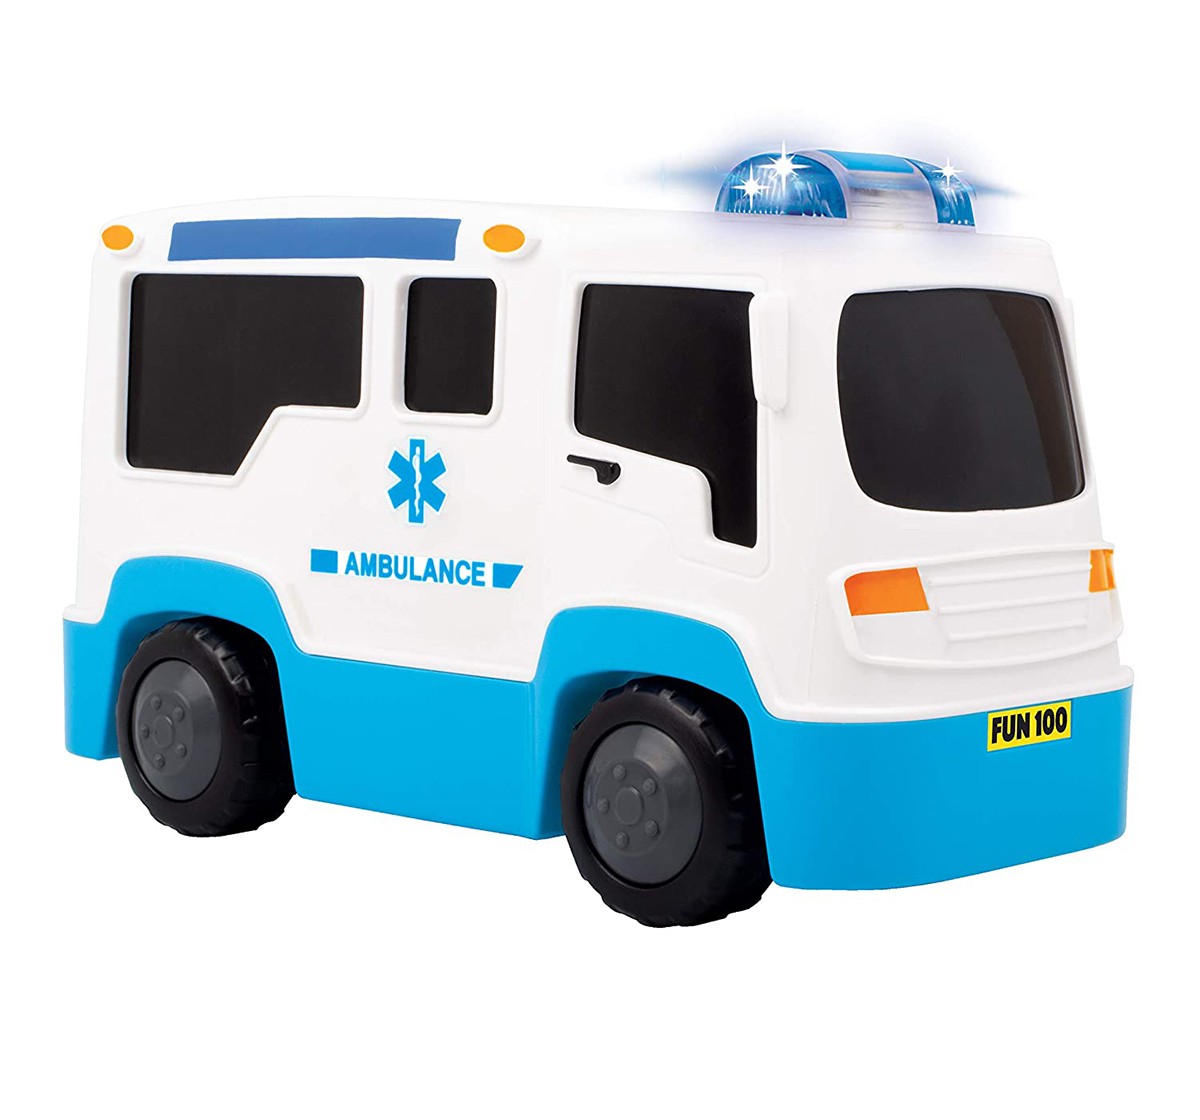  Giggles Rescue Ambulance Early Learner Toys for Kids age 12M+ (White)